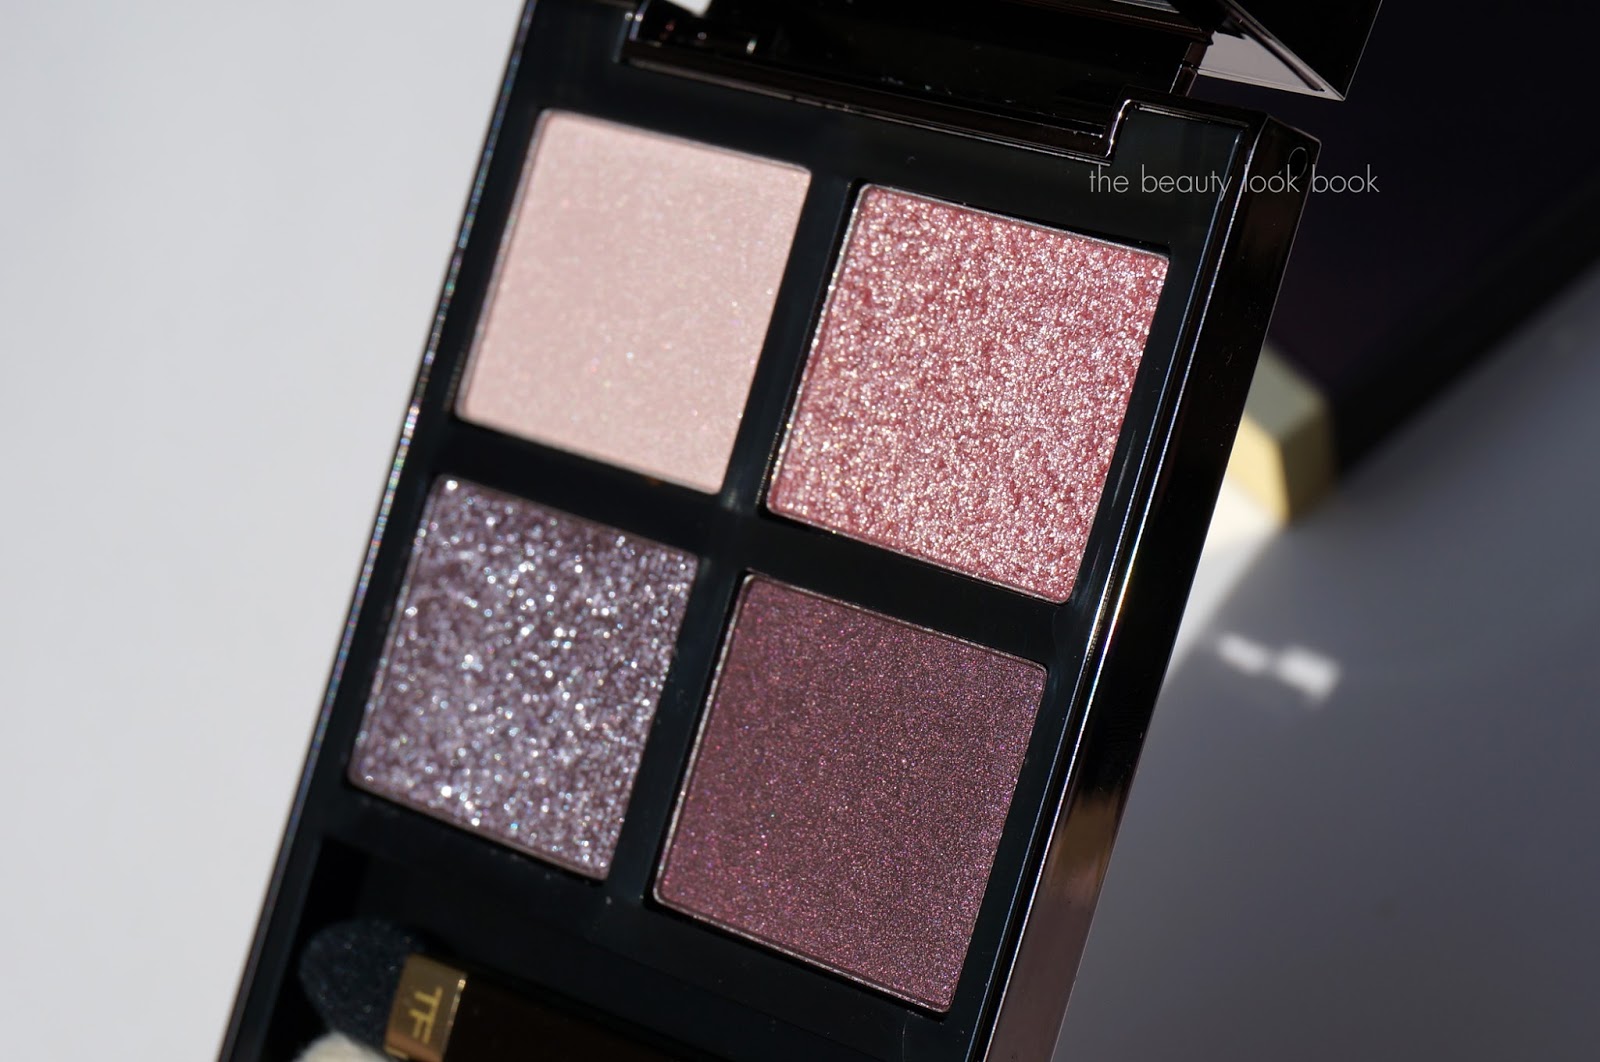 Tom Ford Seductive Rose Eye Color Quad The Beauty Look Book 